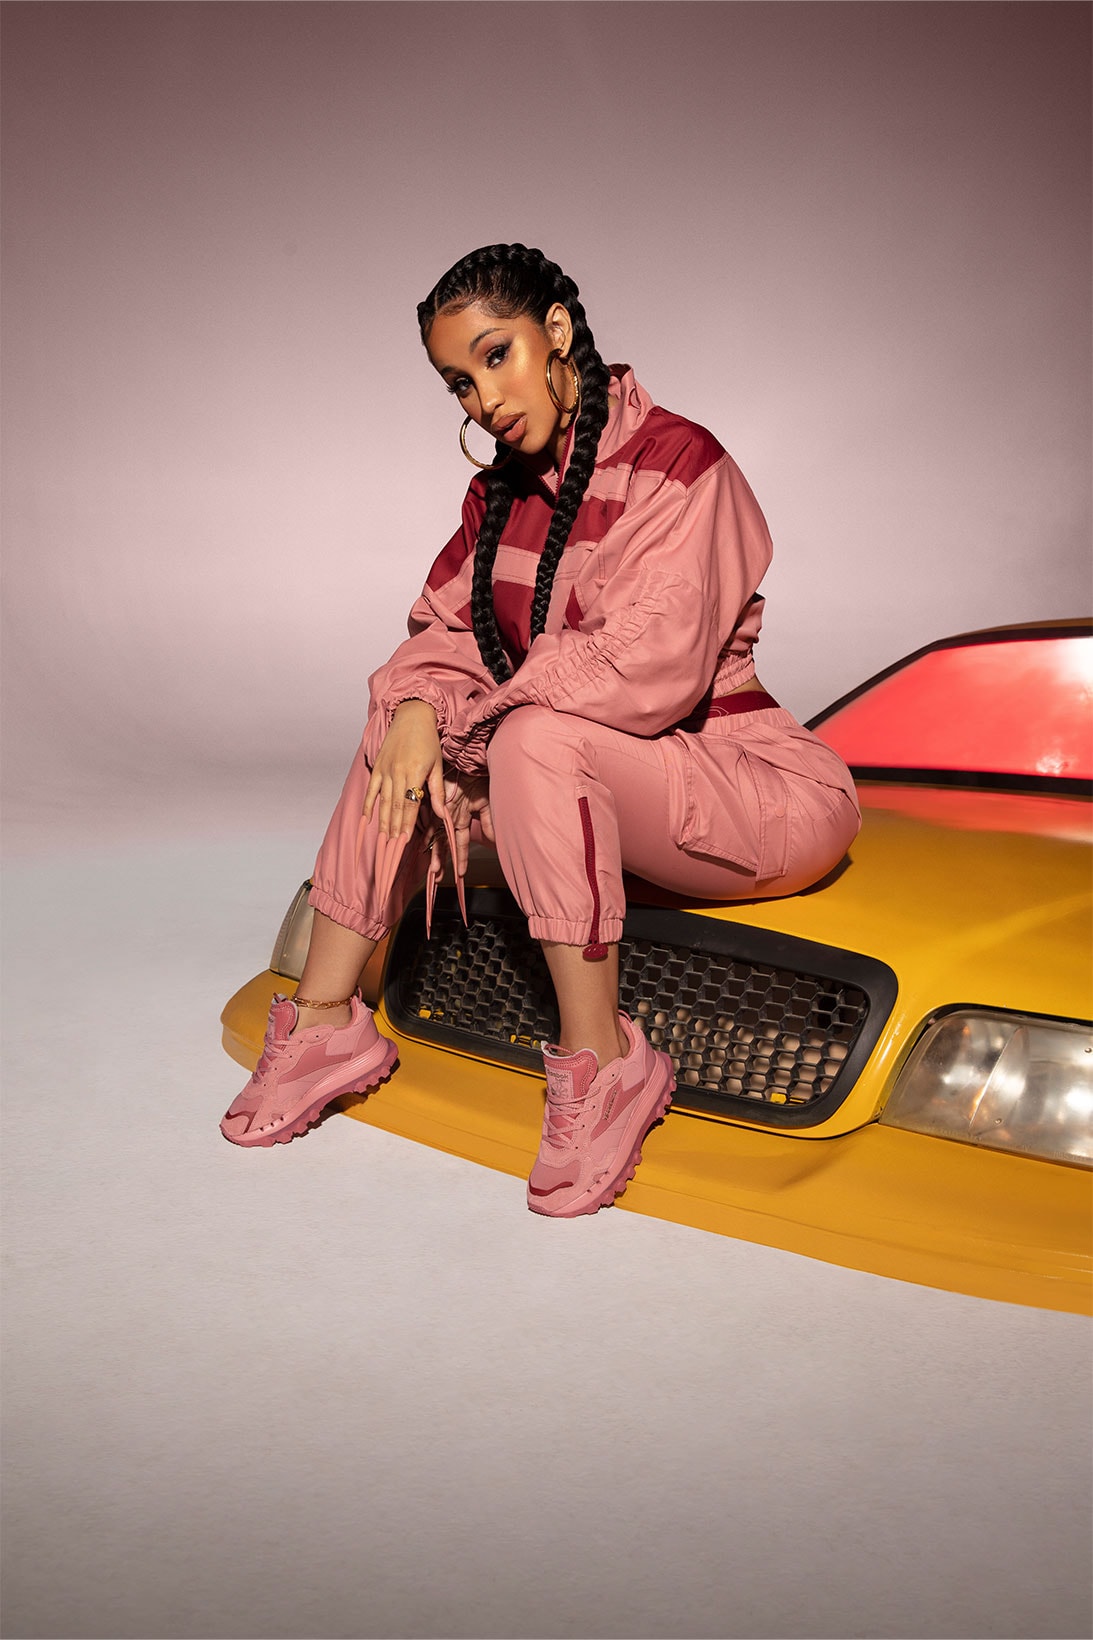 Cardi B Reebok Collaboration Apparel Sneakers NYC Classic Leather Cab Pink Tracksuit